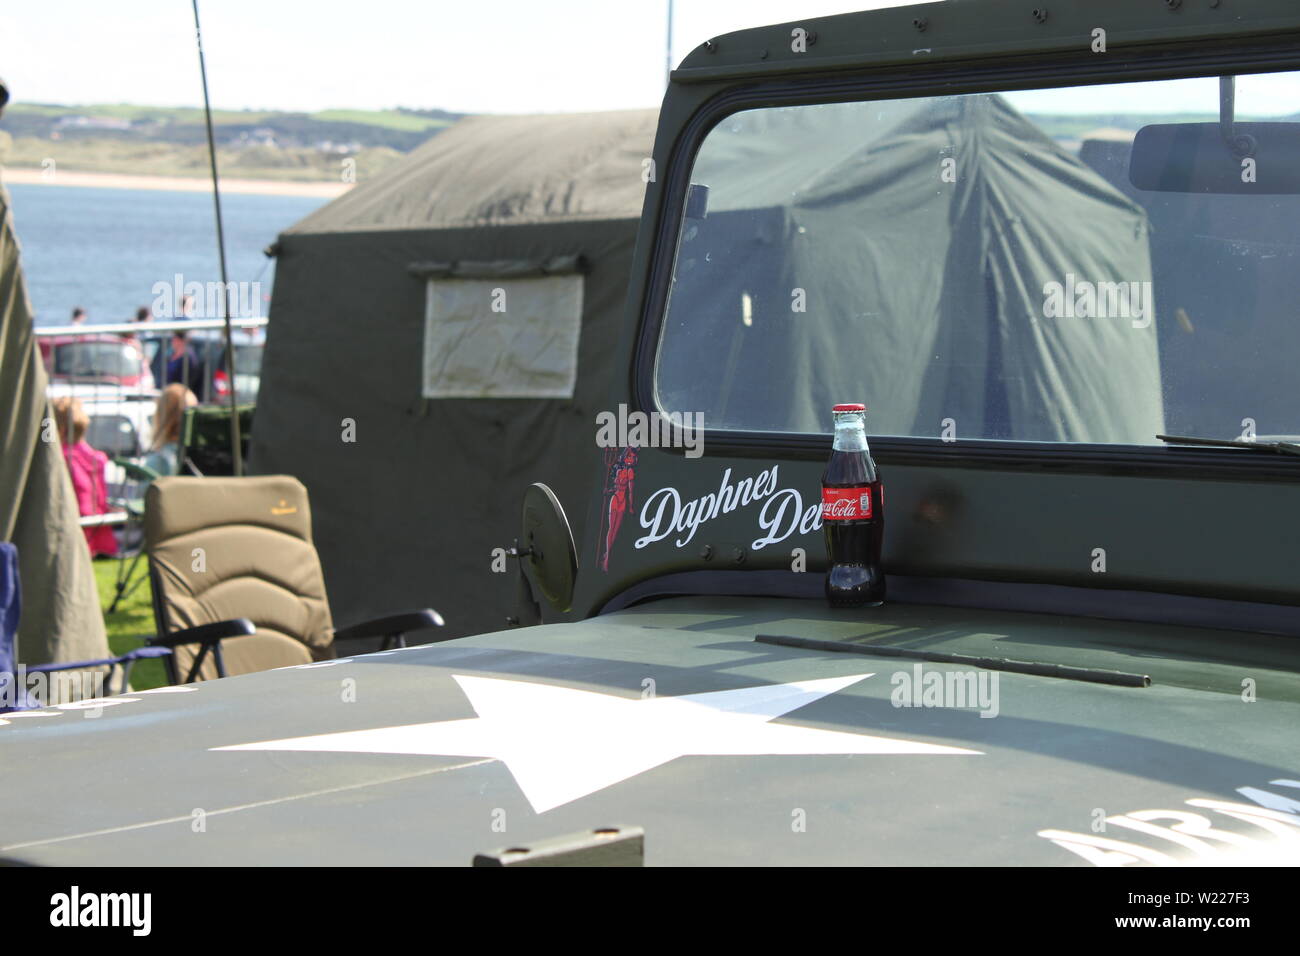 A glass CocaCola bottle sits on the bonnet of a US Army Jeep beside a label saying Daphnes Devil seen at Portrush Air Waves 2019 Stock Photo